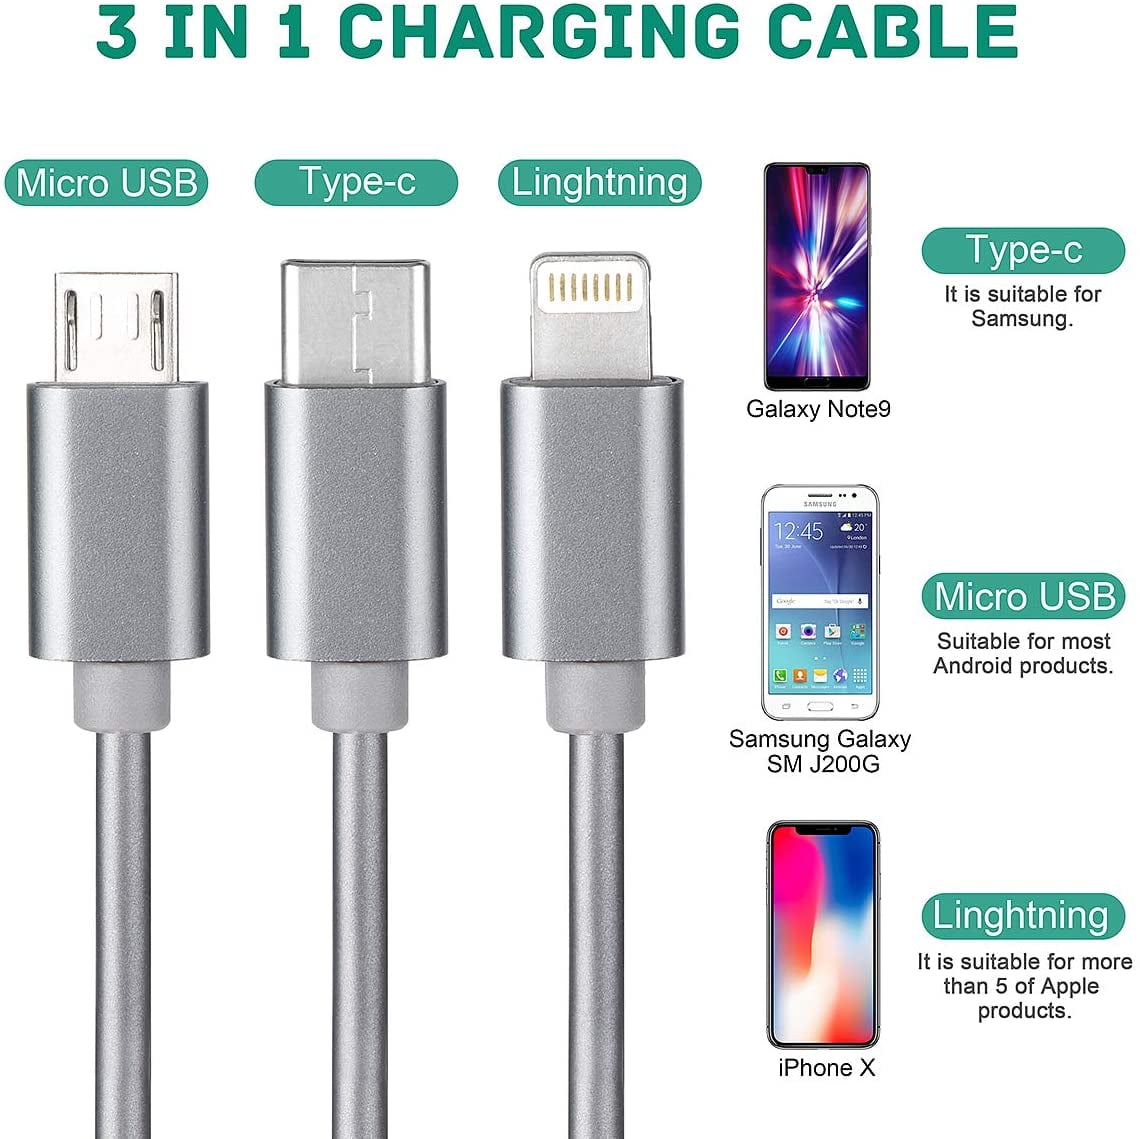 CAFELE Multi Retractable Cable 2 Pack Fast Charger Cord,2020 Upgrade Multiple Charging Cable 4FT 3-in-1 USB Sync Charge Cord with Phone/Type C/Micro USB/Motorola/Samsung Galaxy/Pixel/Sony/LG/HTC-White